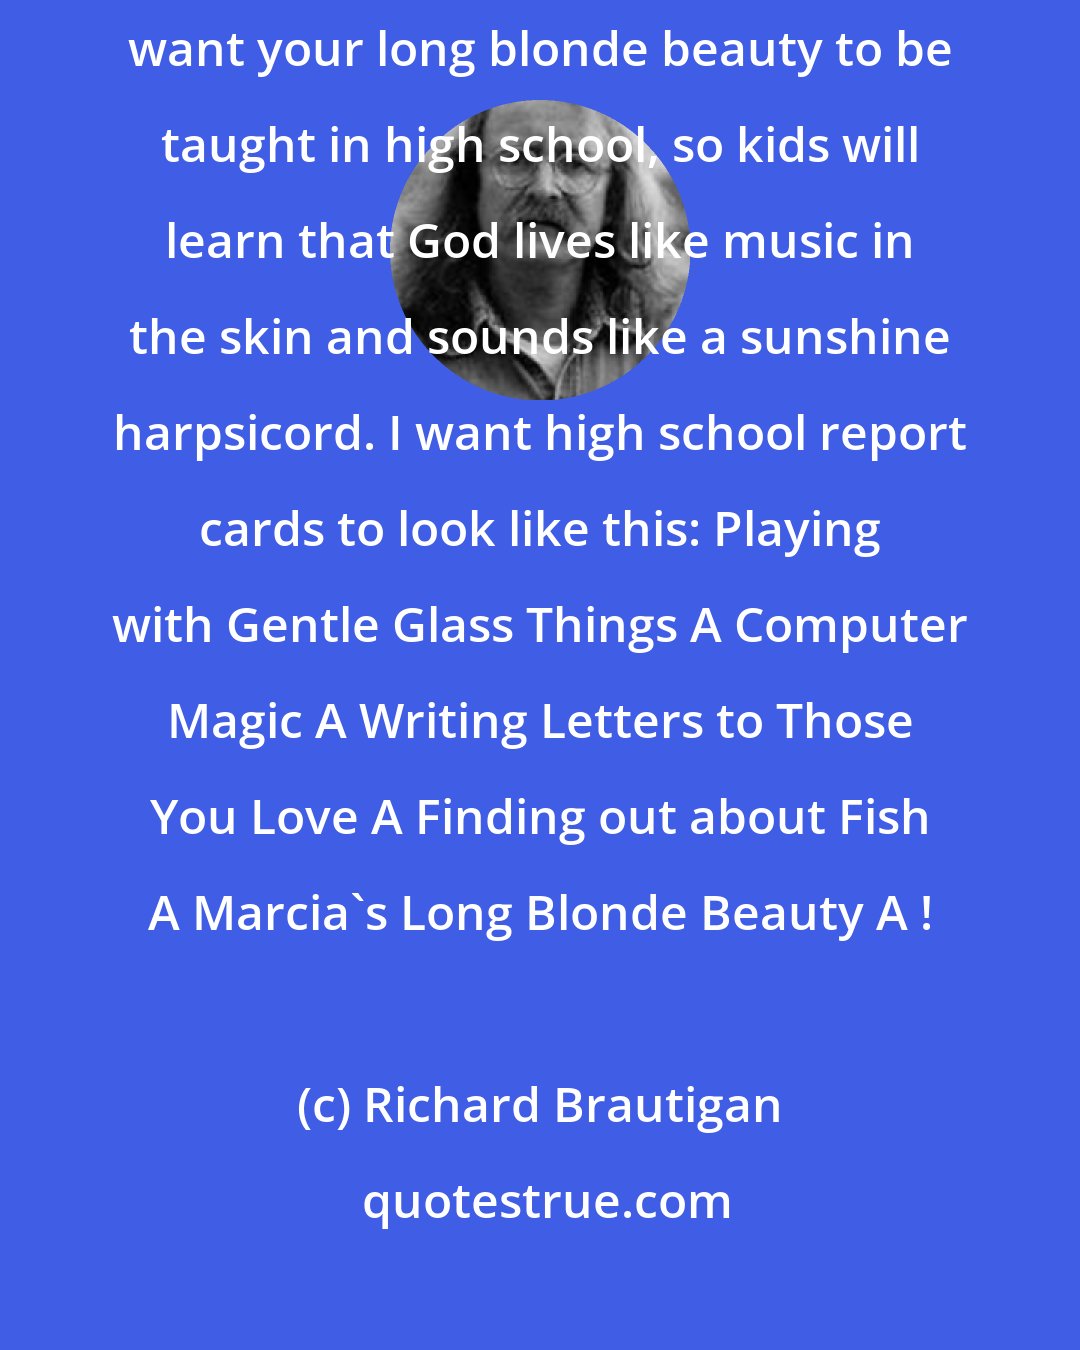 Richard Brautigan: Gee, You're so Beautiful That It's Starting to Rain Oh, Marcia, I want your long blonde beauty to be taught in high school, so kids will learn that God lives like music in the skin and sounds like a sunshine harpsicord. I want high school report cards to look like this: Playing with Gentle Glass Things A Computer Magic A Writing Letters to Those You Love A Finding out about Fish A Marcia's Long Blonde Beauty A+!